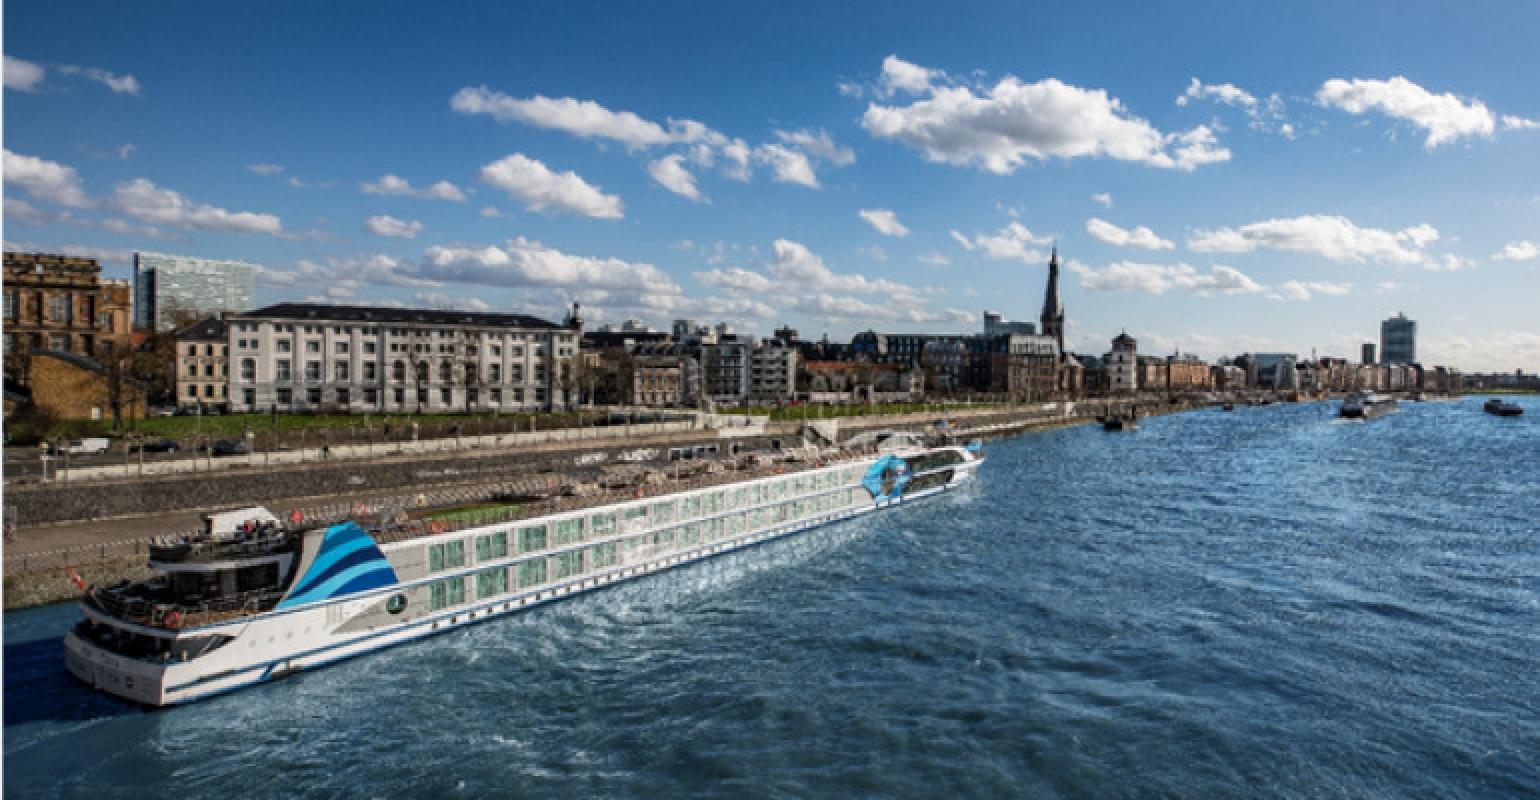 VIVA operating winter river cruises within Central Europe seatrade